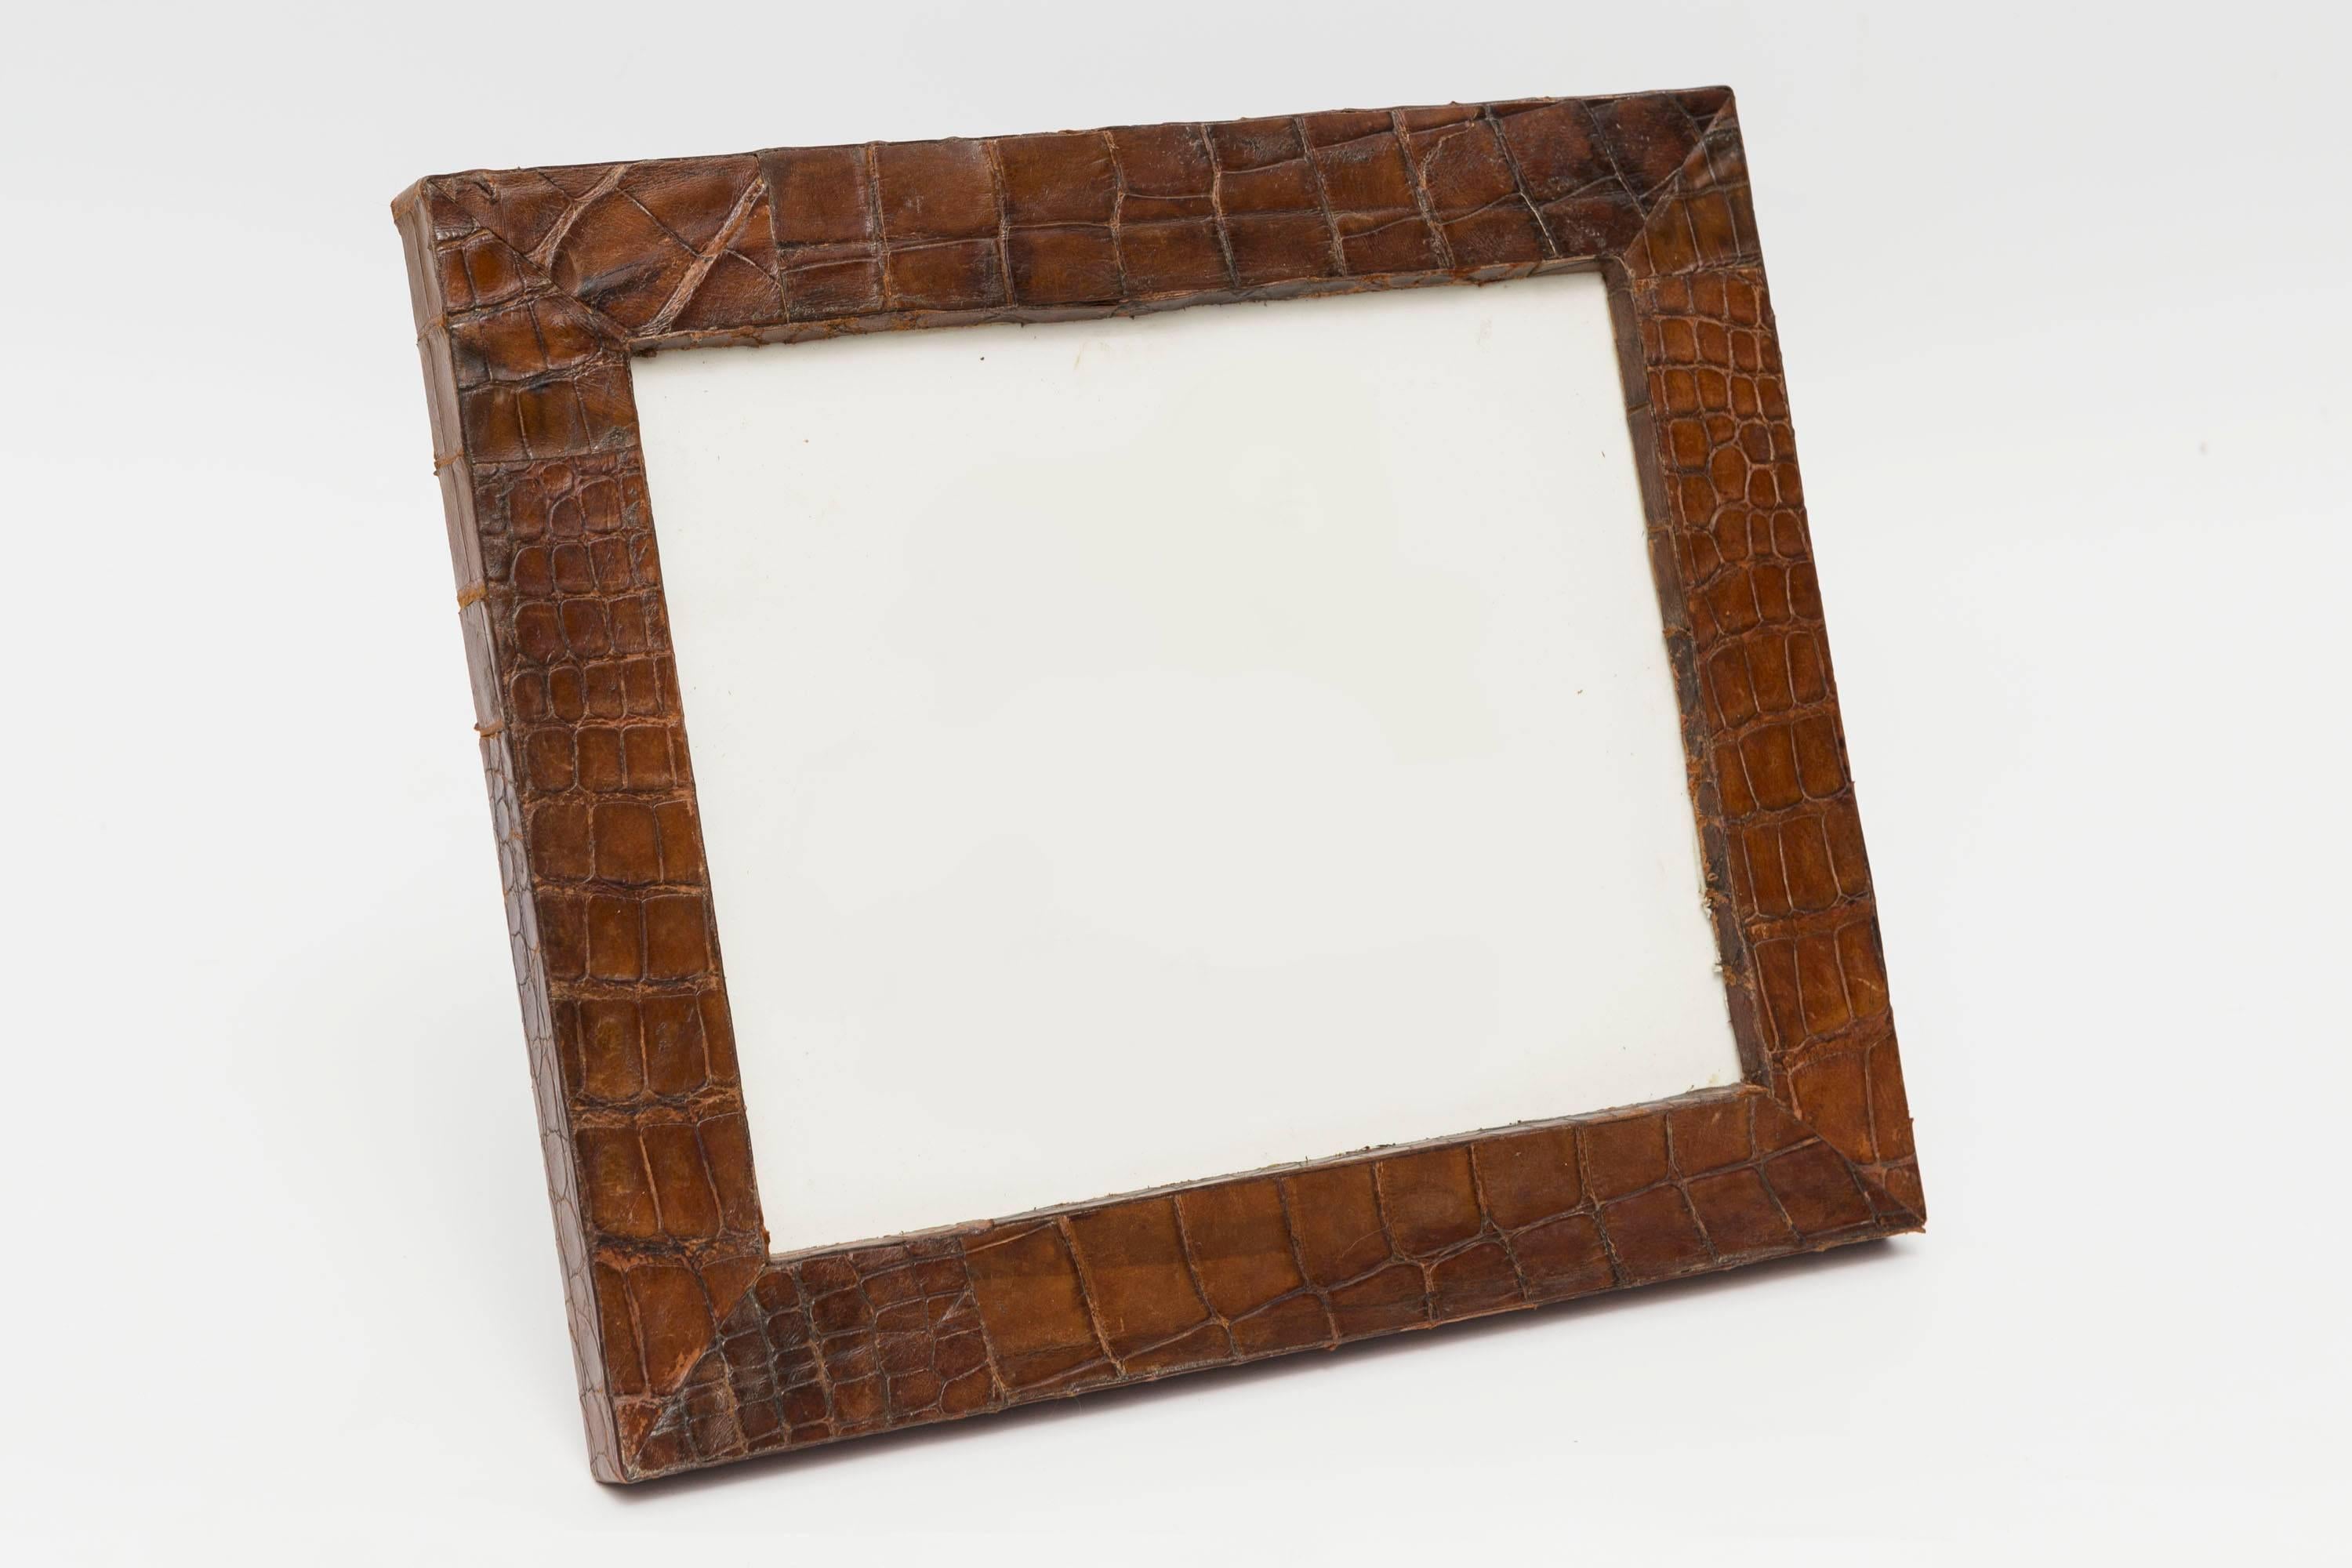 This is a vintage brown alligator picture frame of a nice size.